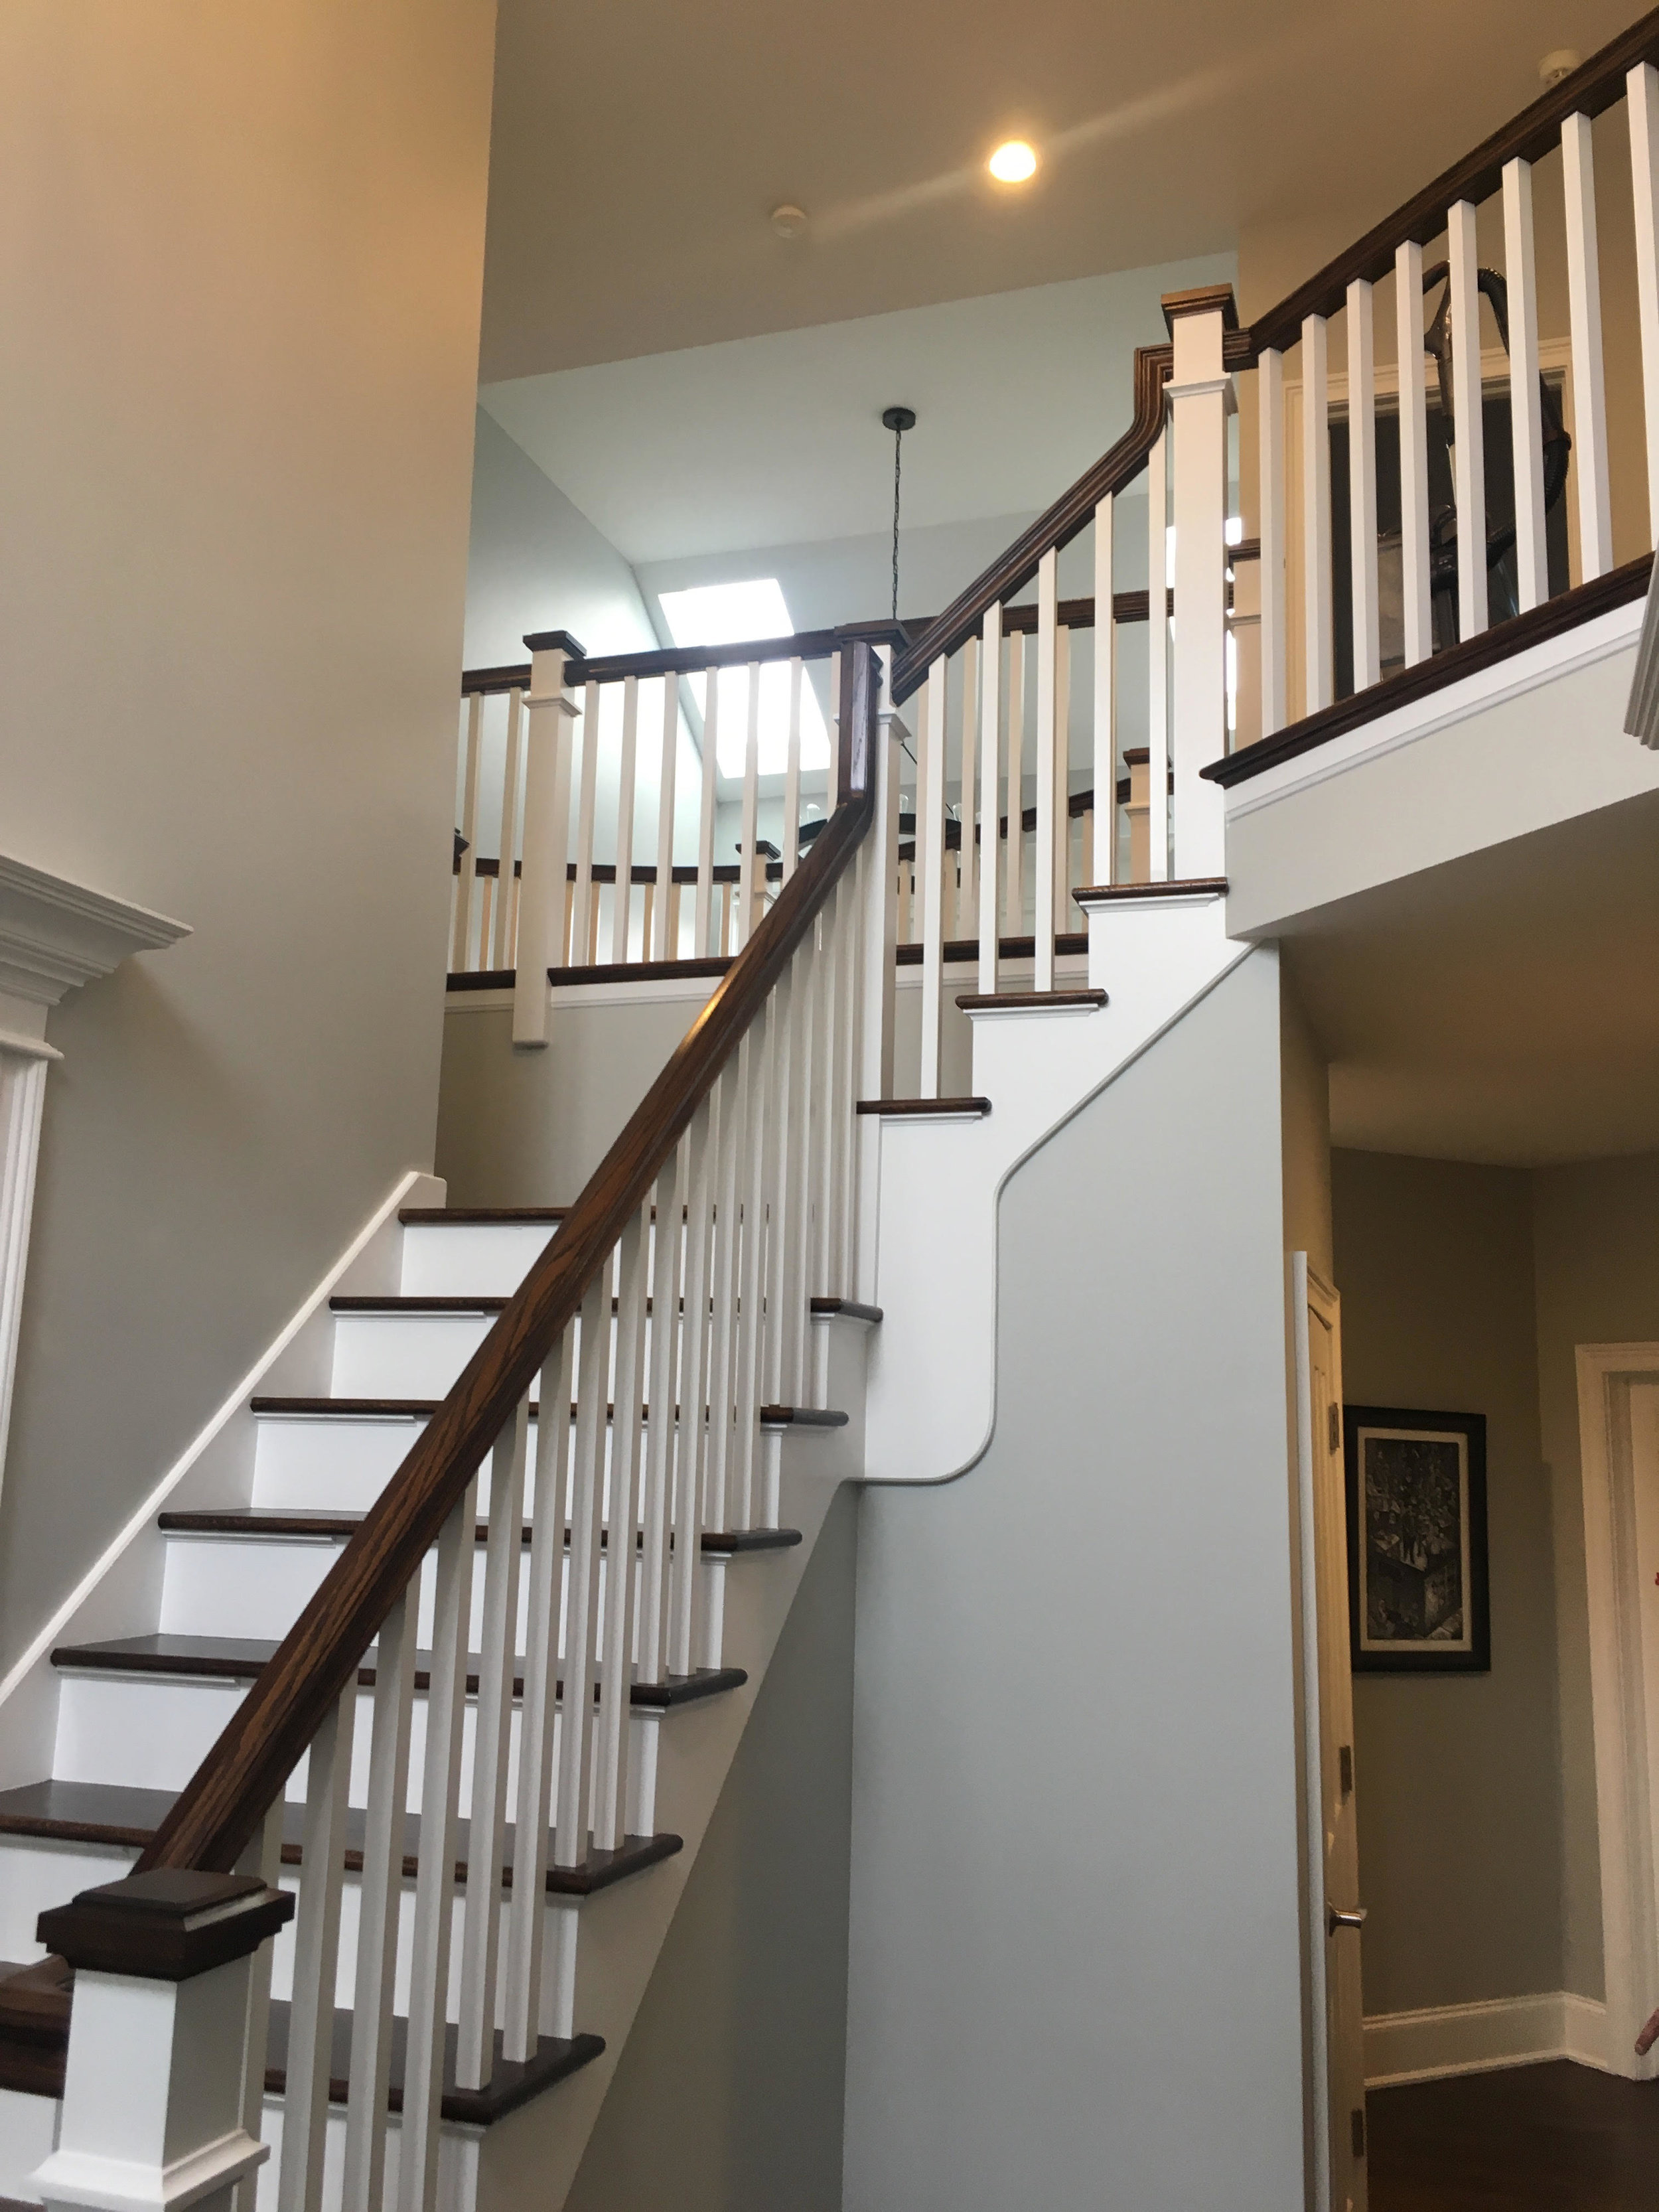 Foyer Remodeling in this Glen Ellyn Custom Home. New Handrail, Painted White, Square Spindles &amp; Square Starting Newels